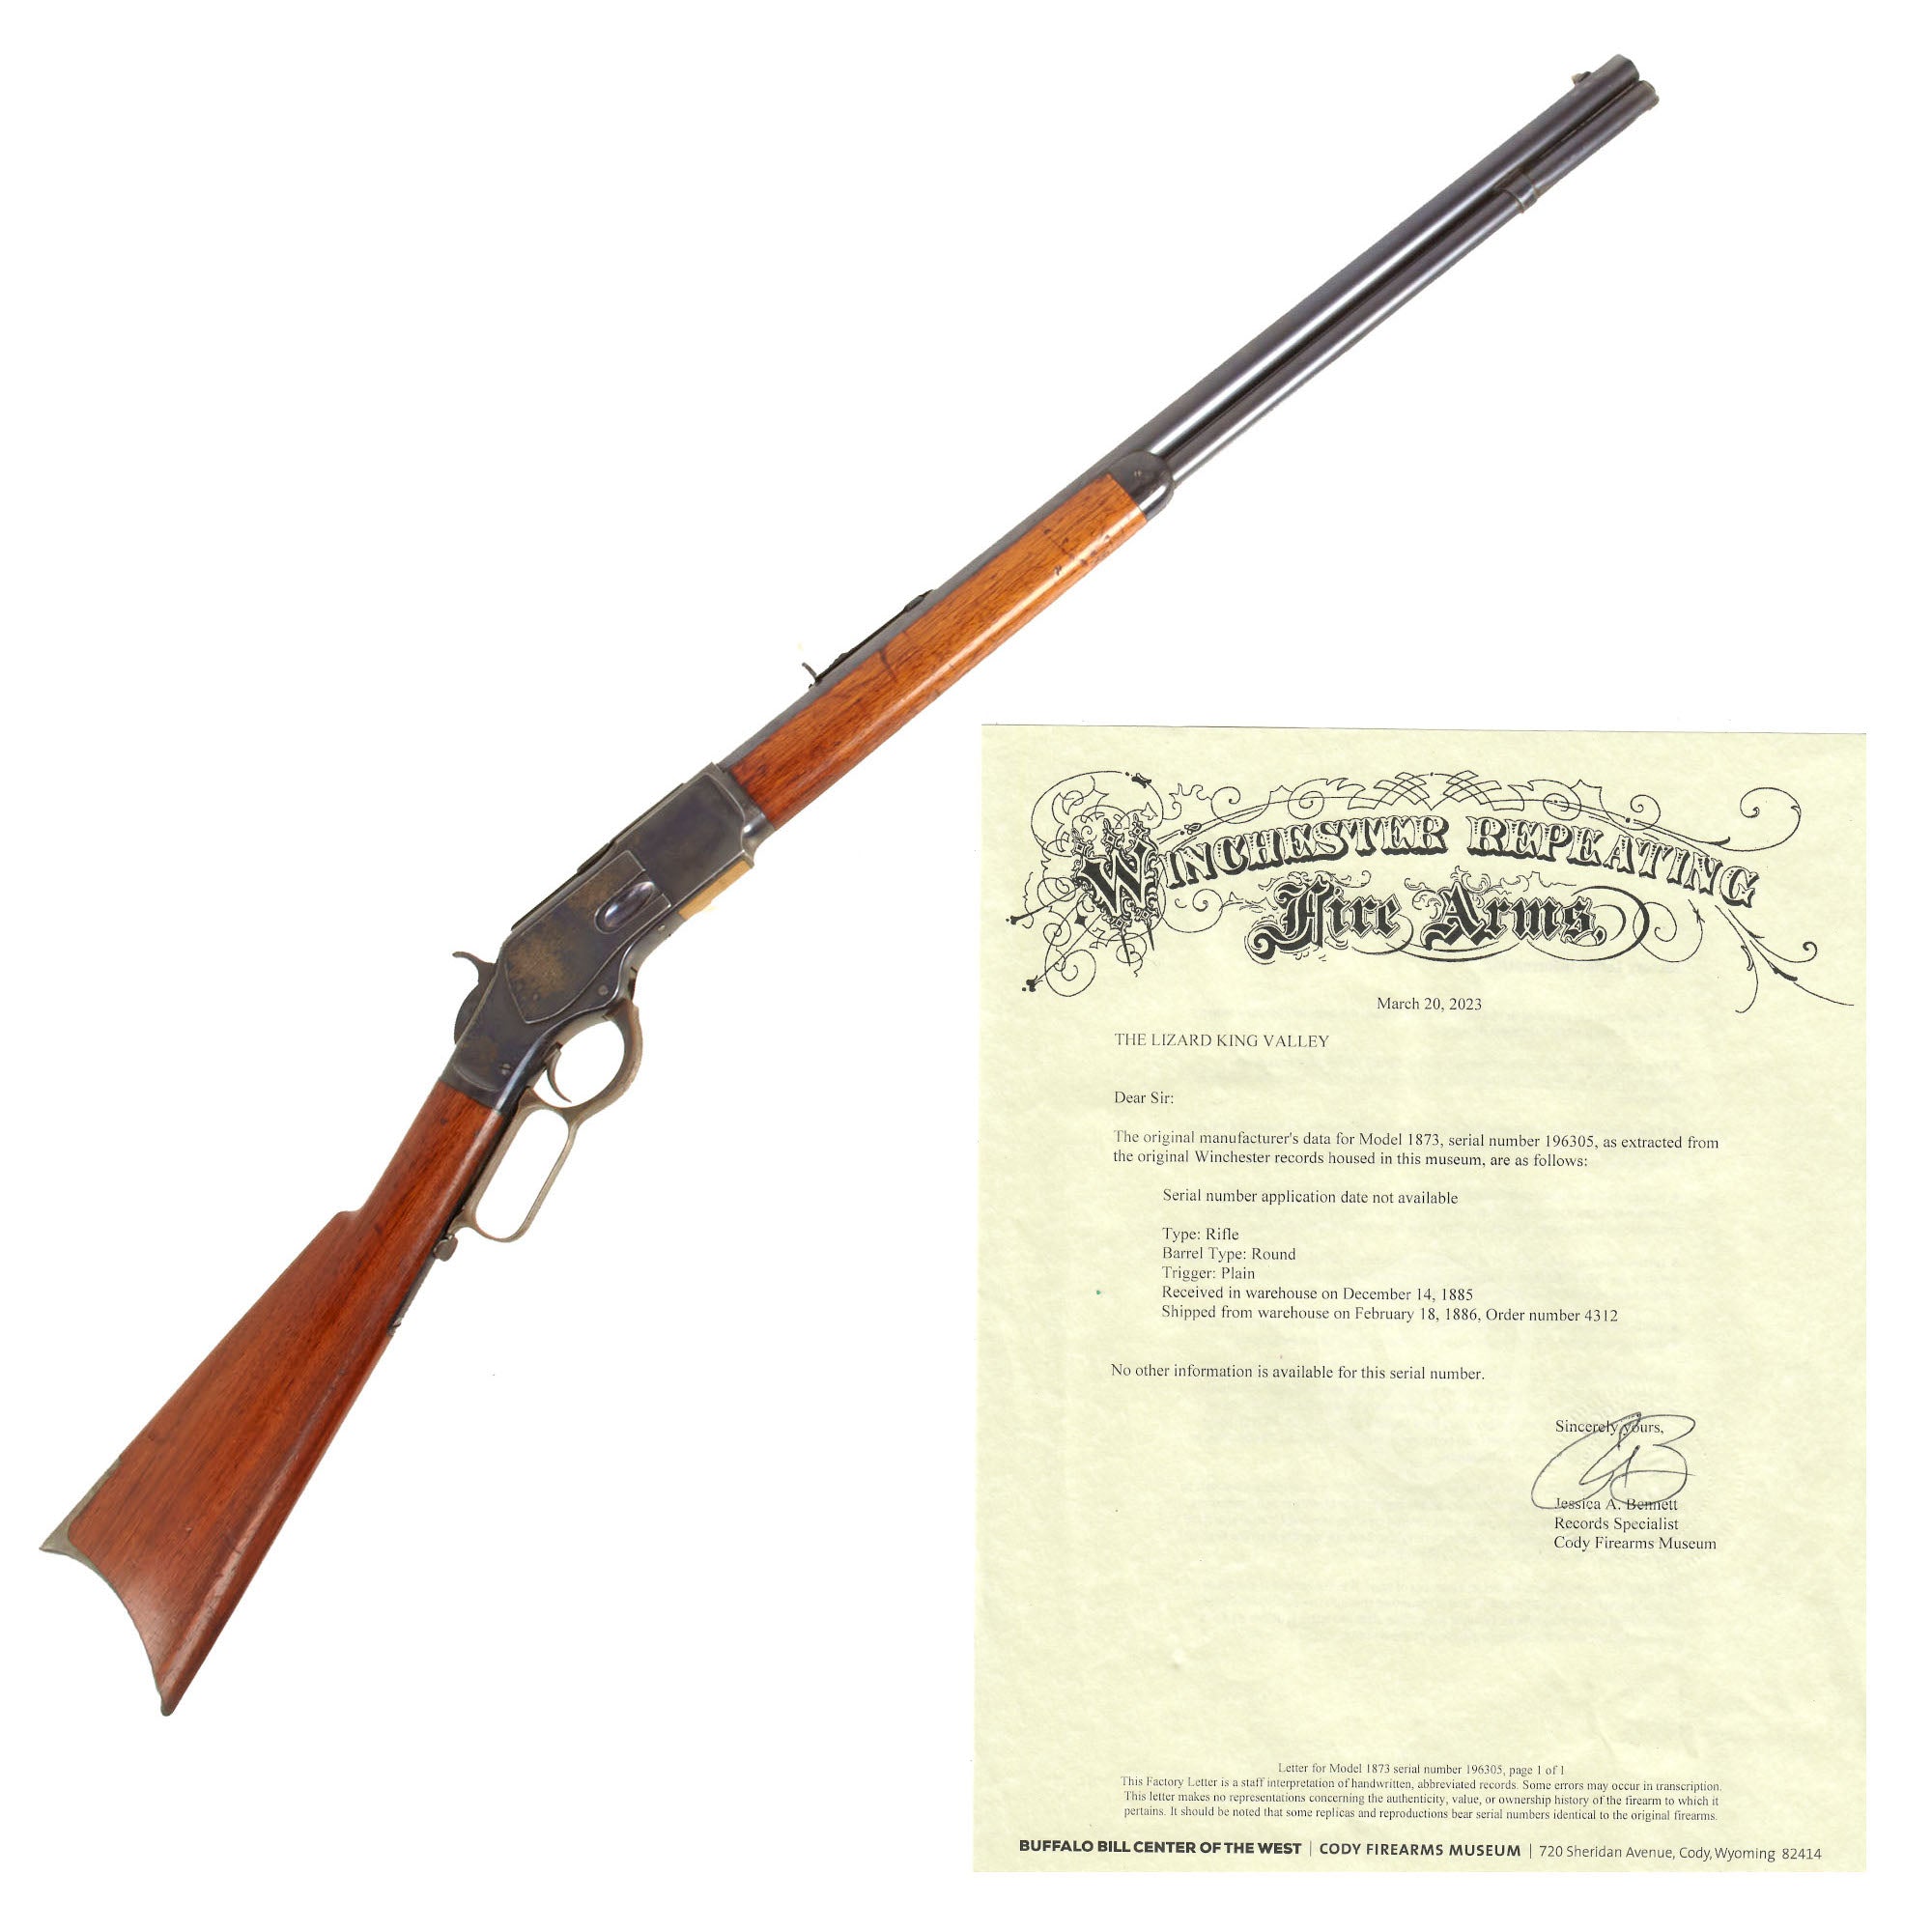 Story of the famous winchester rifle